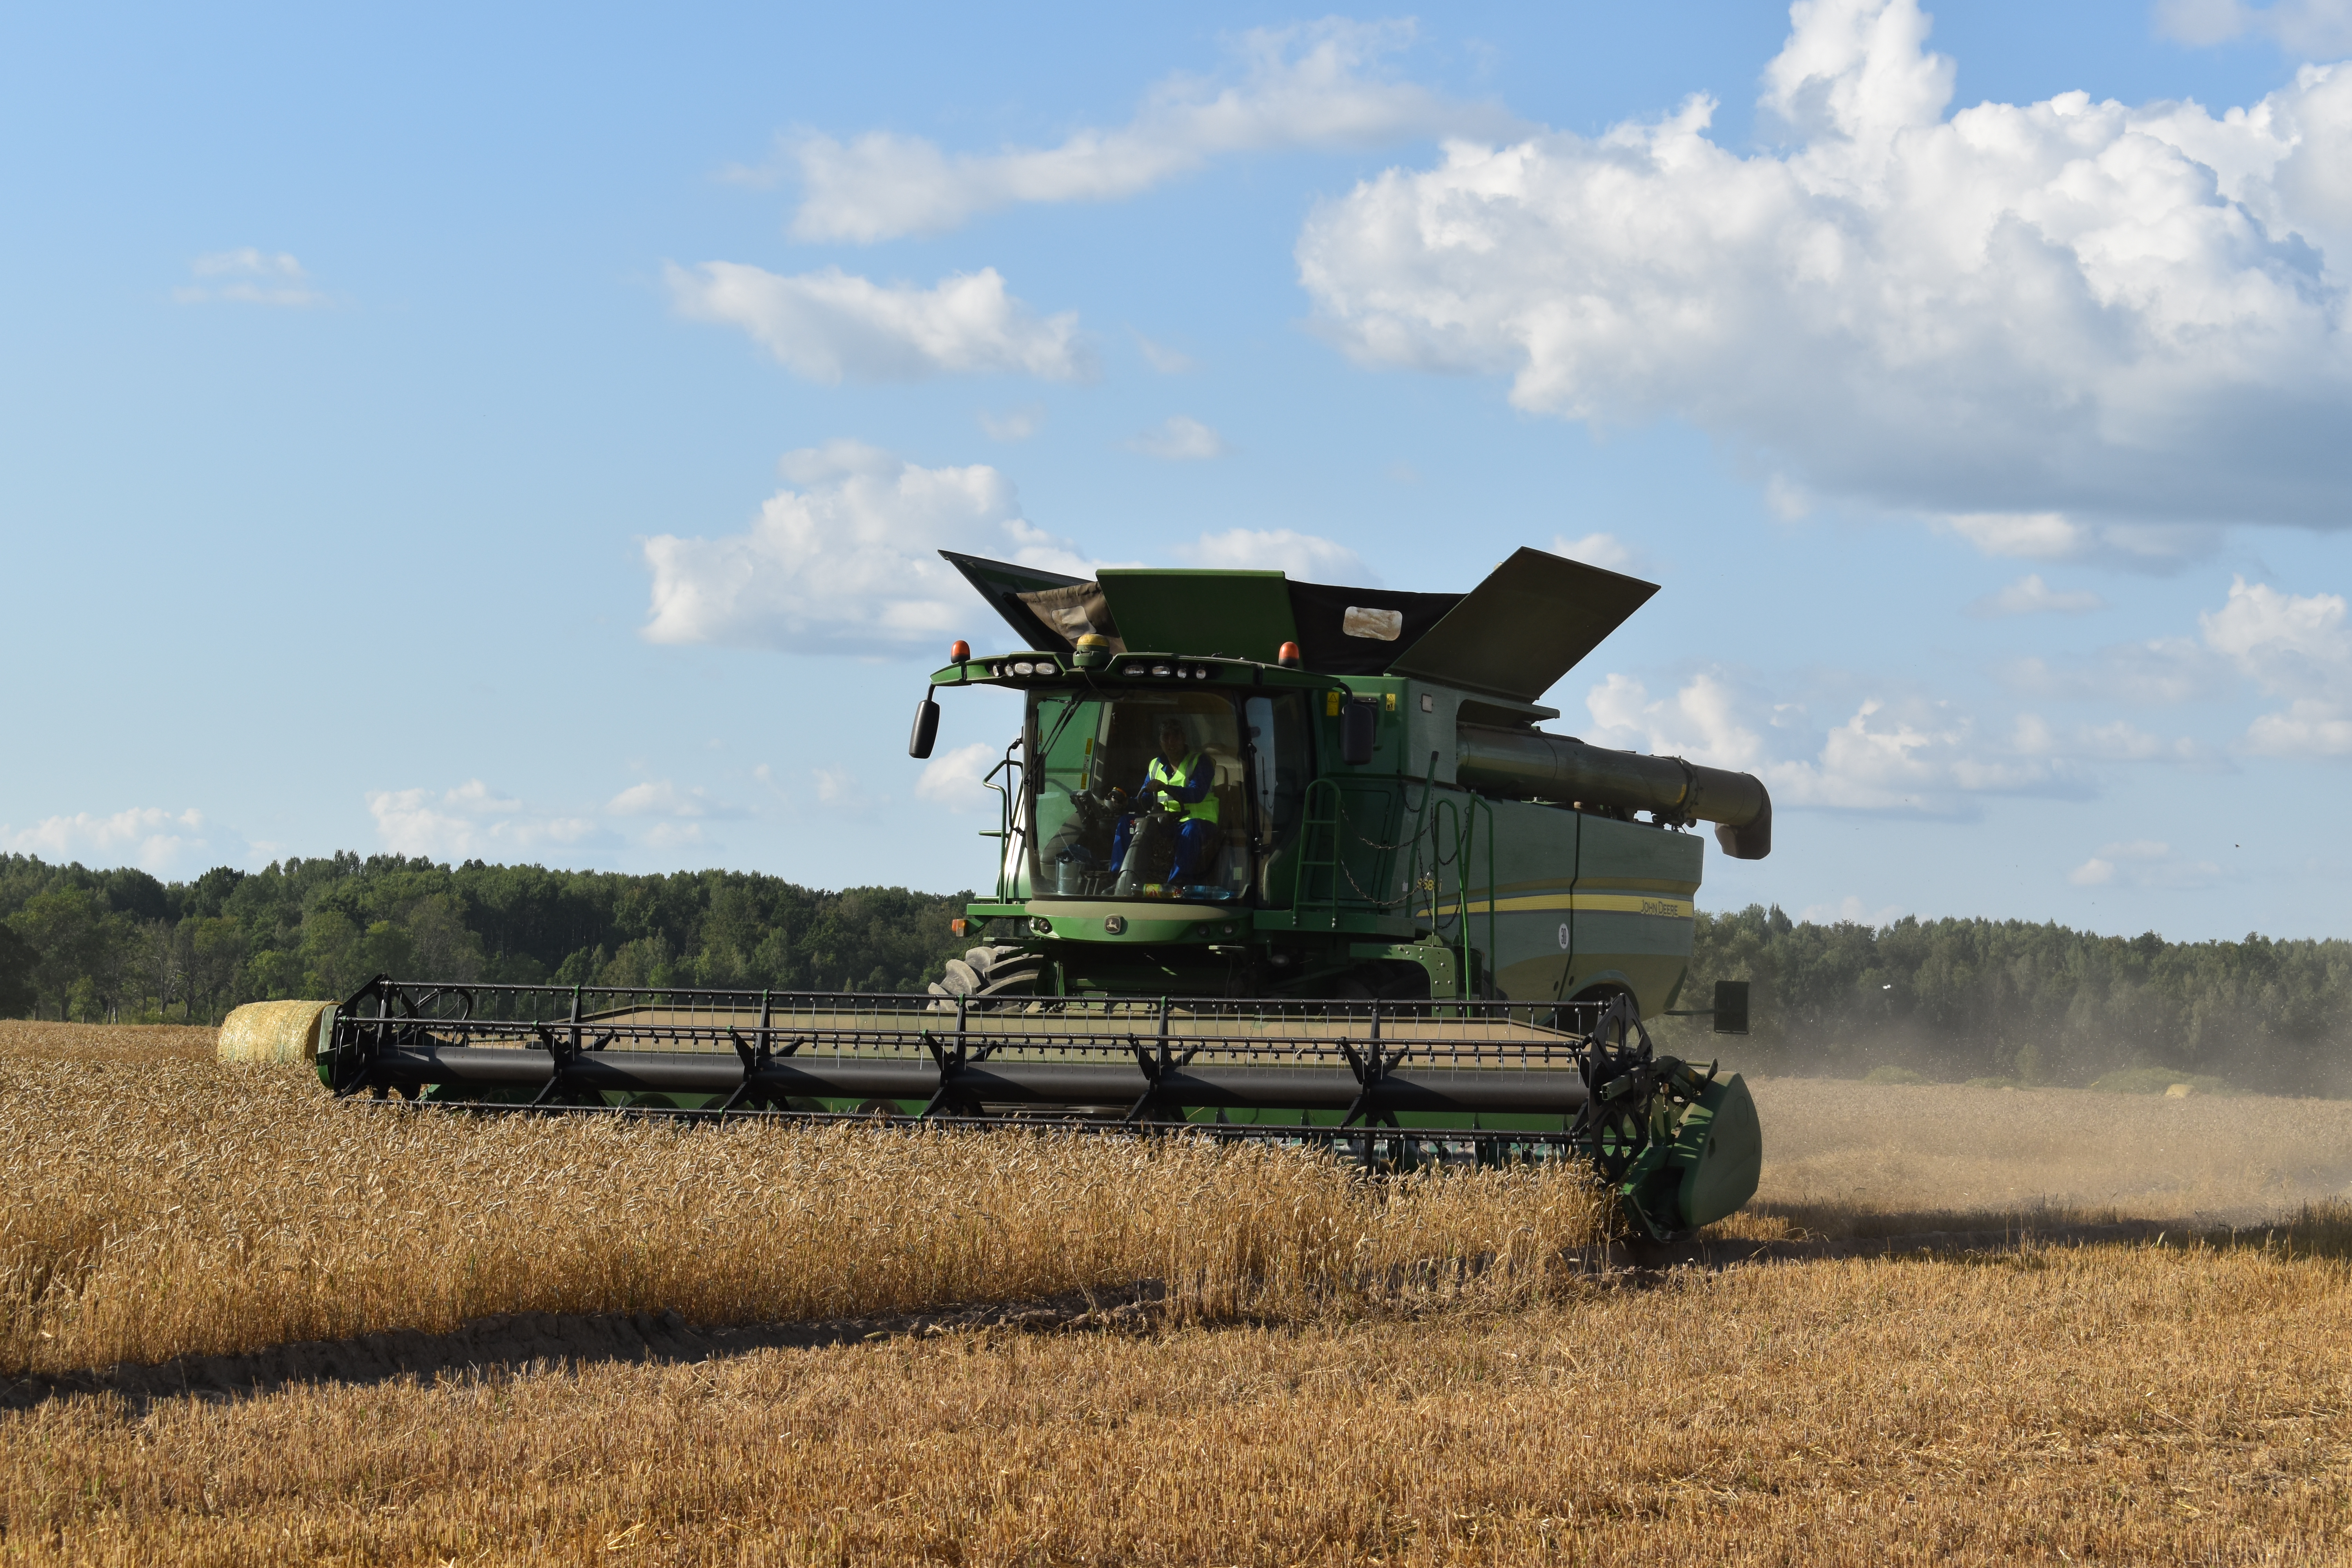 HARVESTING CAMPAIGN OF GRAIN CROPS HAS BEEN COMPLETED IN DOLGOVGROUP AGRICULTURAL HOLDING COMPANY